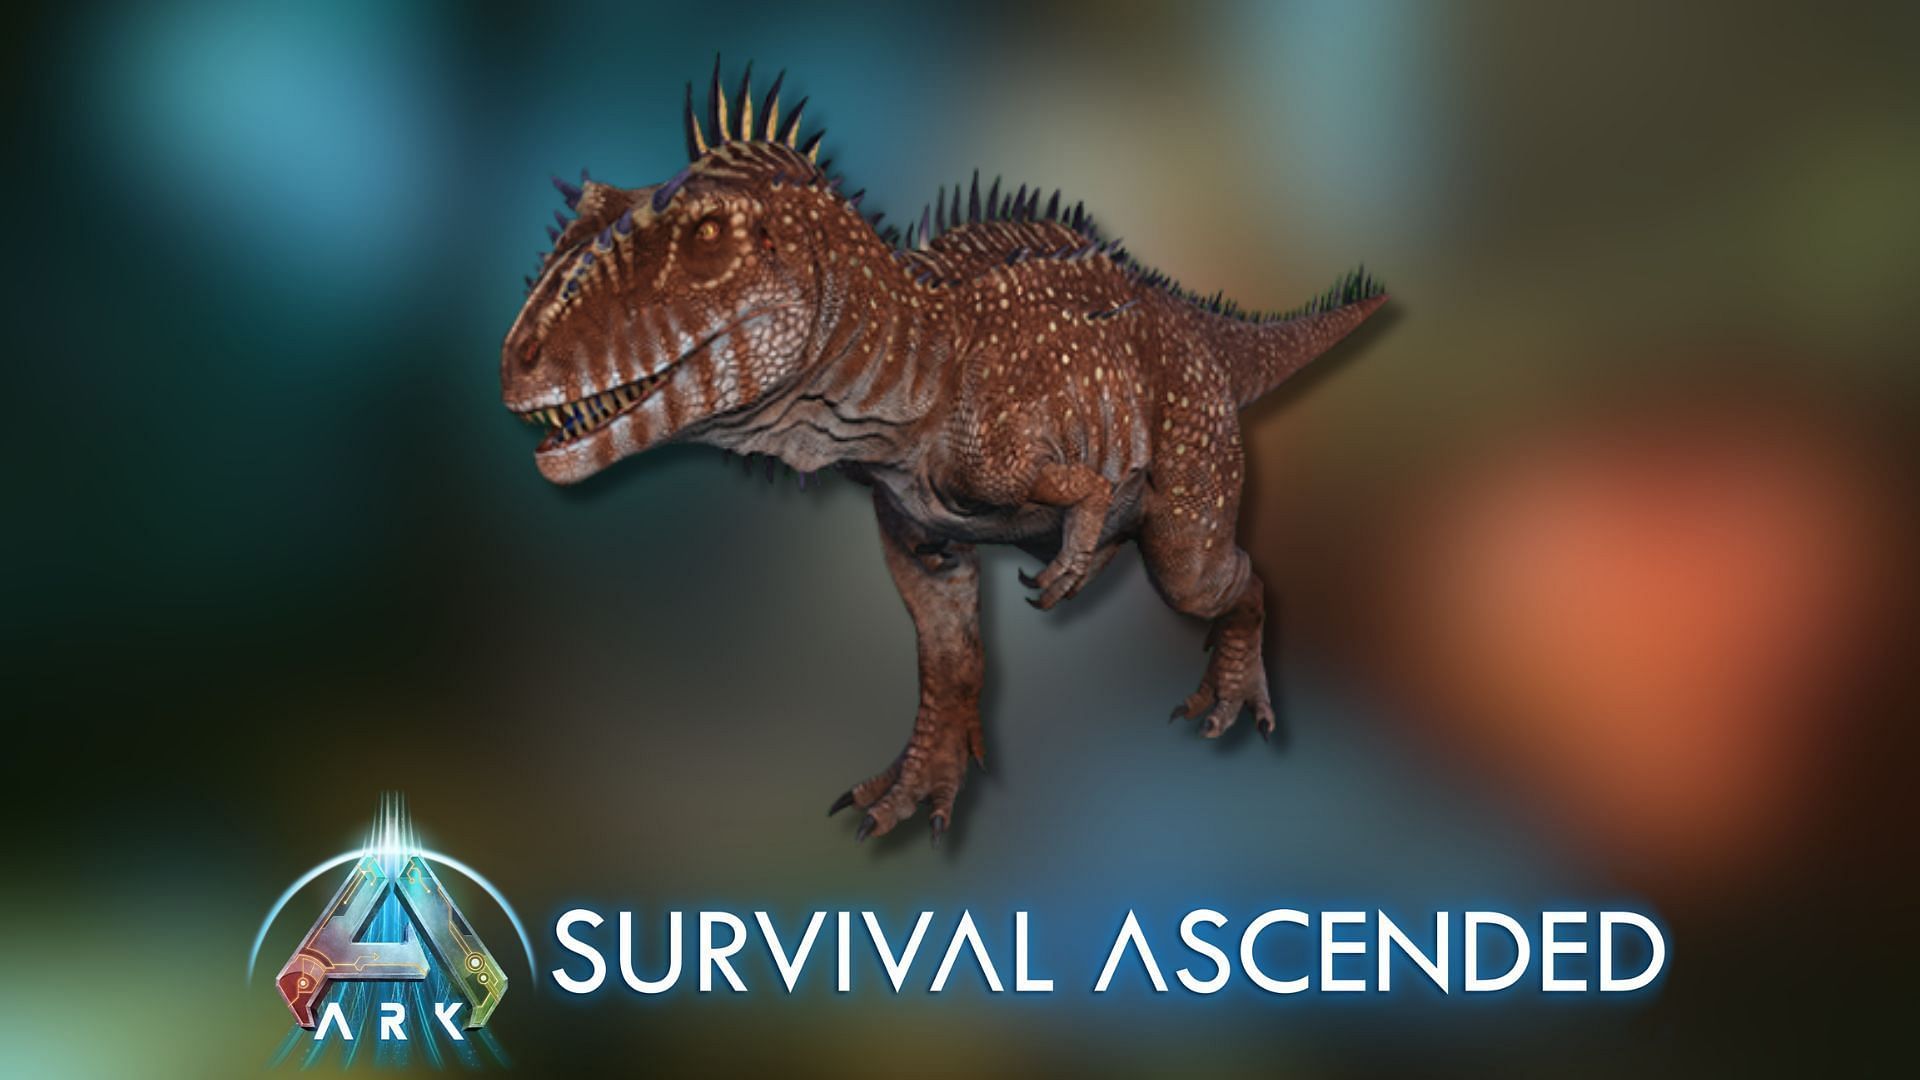 Carcharodontosaurus has one of the best quirks in Ark Survival Ascended, allowing it to gain HP, speed, and damage with each kill. (Image via Studio Wildcard)